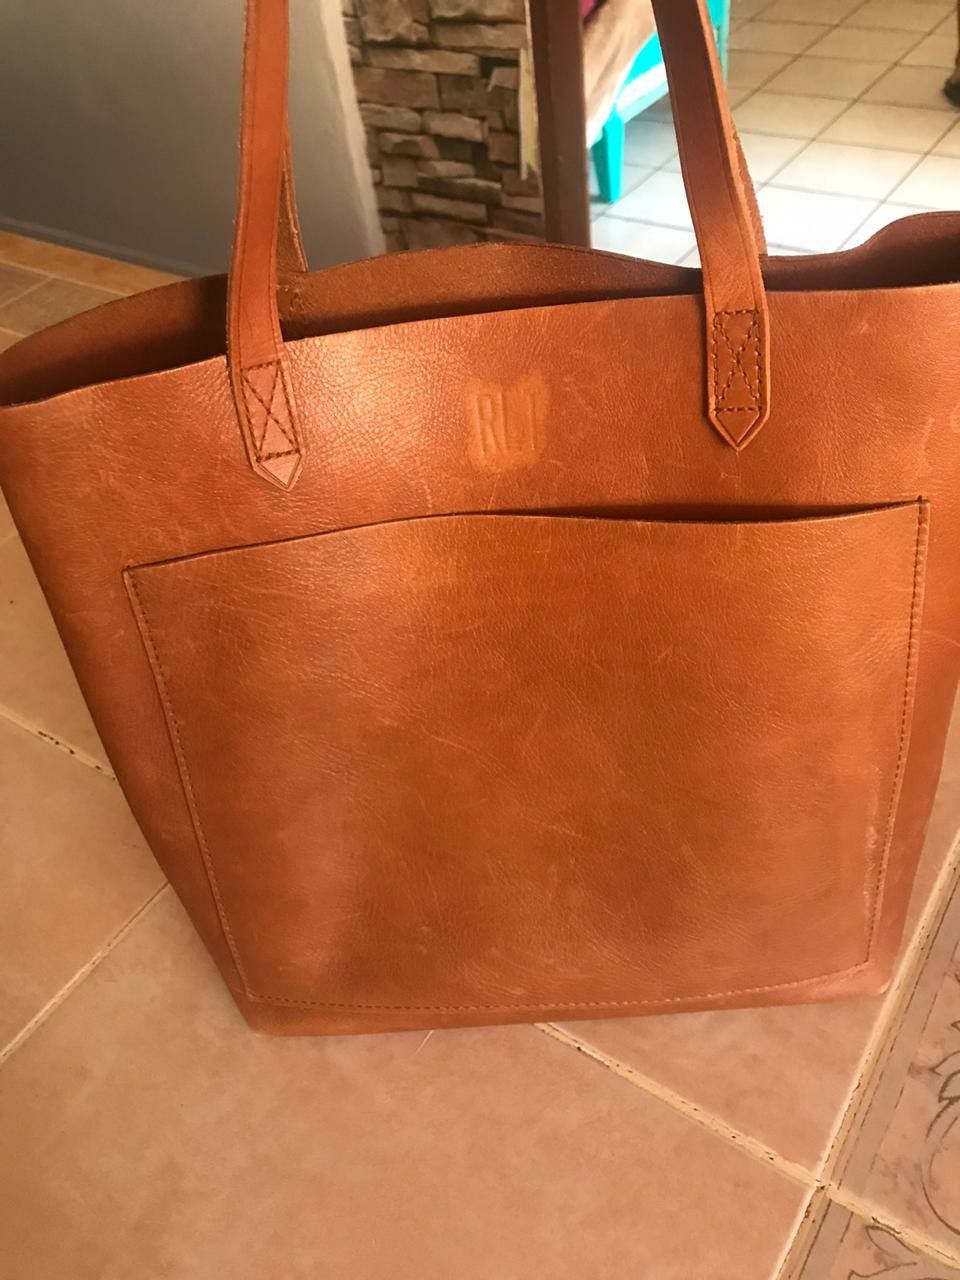 Madewell tote 100% Leather.